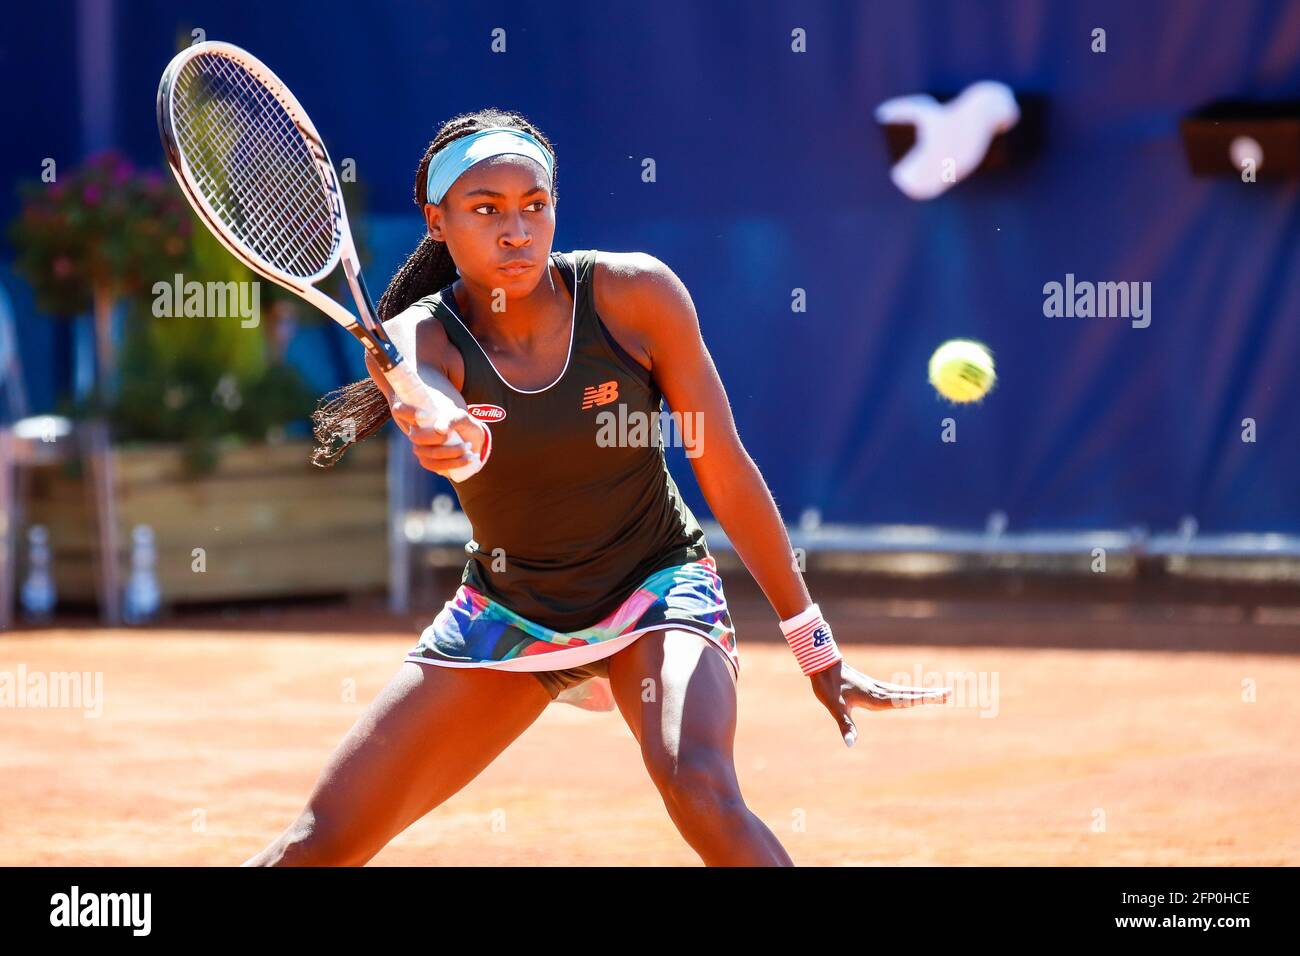 Parma, Italy. 20th May, 2021. The American tennis player Cori Gauff during WTA 250 Emilia-Romagna Open 2021, Tennis Internationals in Parma, Italy, May 20 2021 Credit: Independent Photo Agency/Alamy Live News Stock Photo